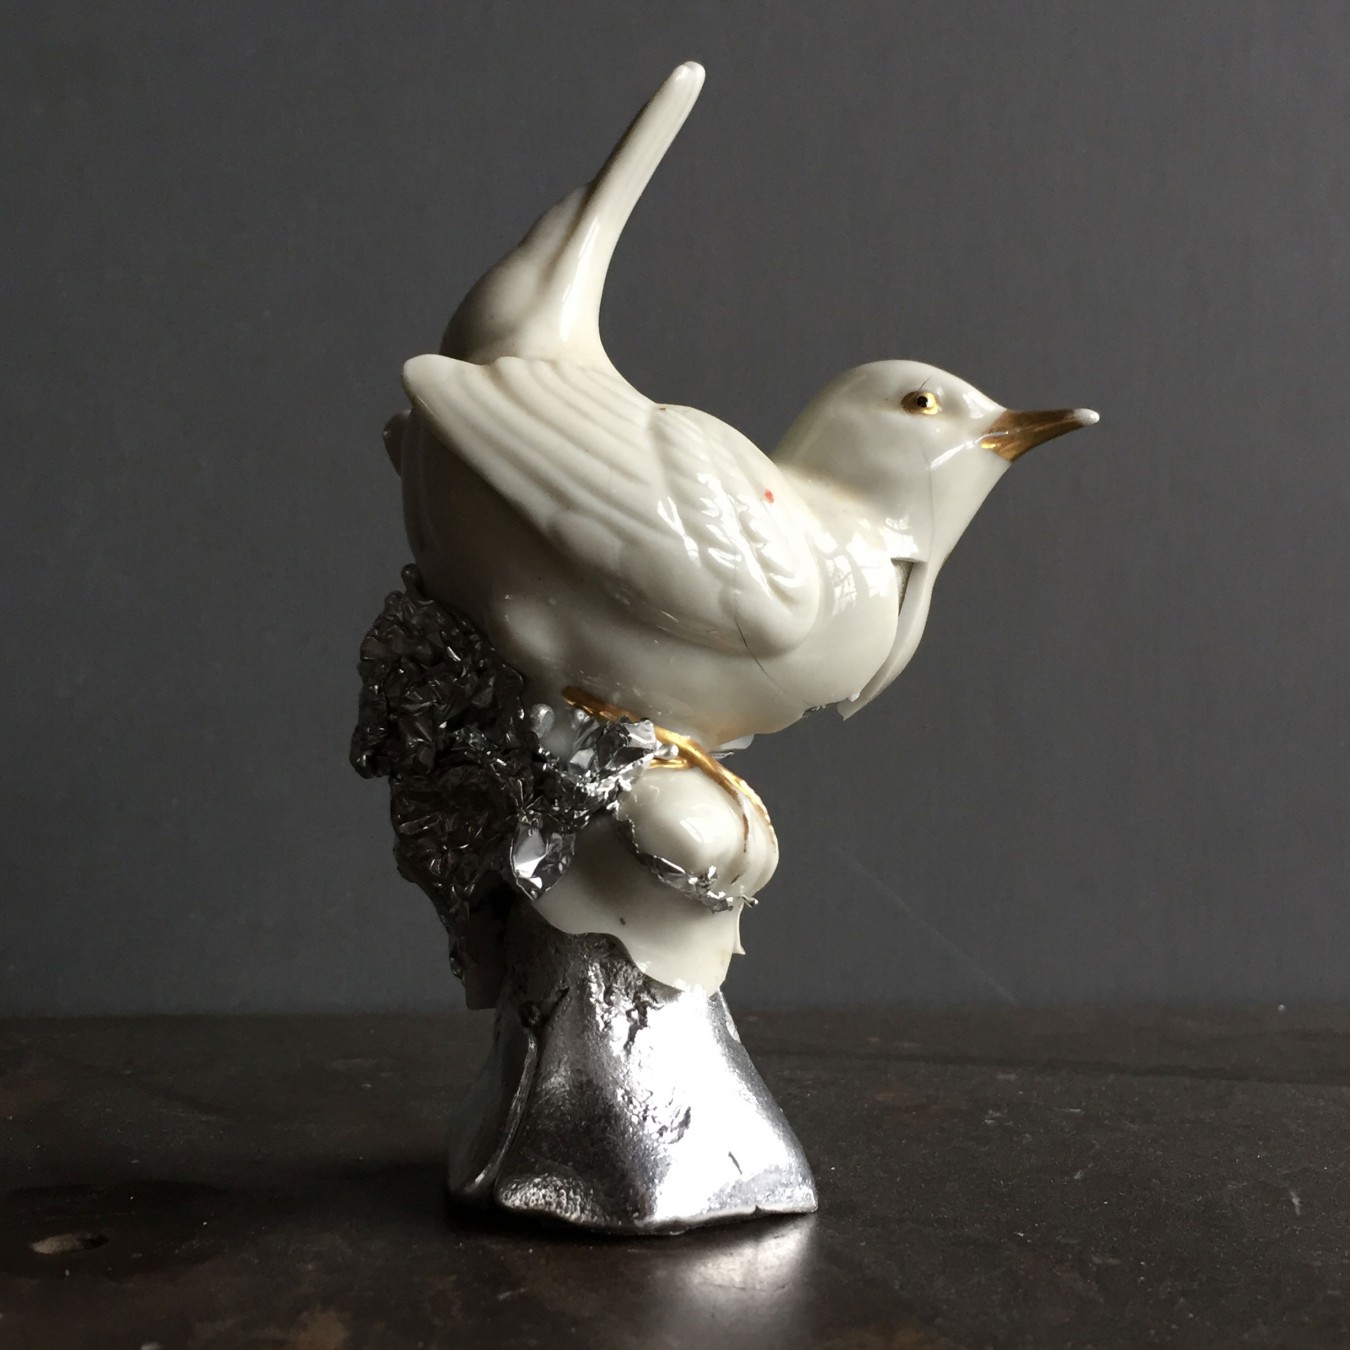 Image of a small ceramic wren bird. Used as a mould and showing the collision of 2 materials coming together. Hammered to open up and expose the cast pewter core